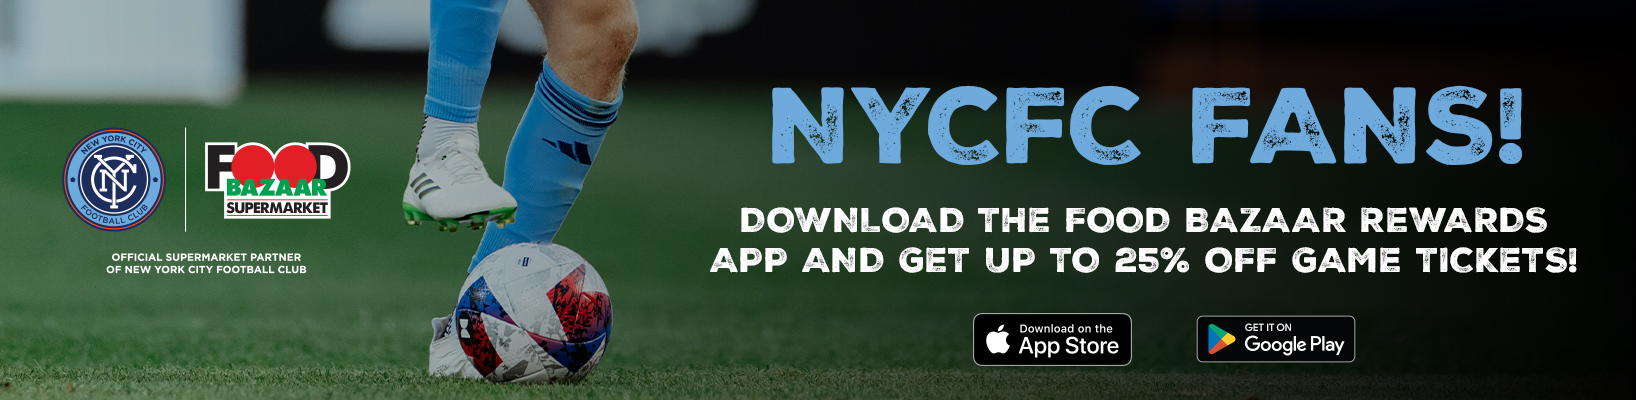 NYCFC FANS! - Download the Food Bazaar Rewards App and get up to 25% off game day tickets!